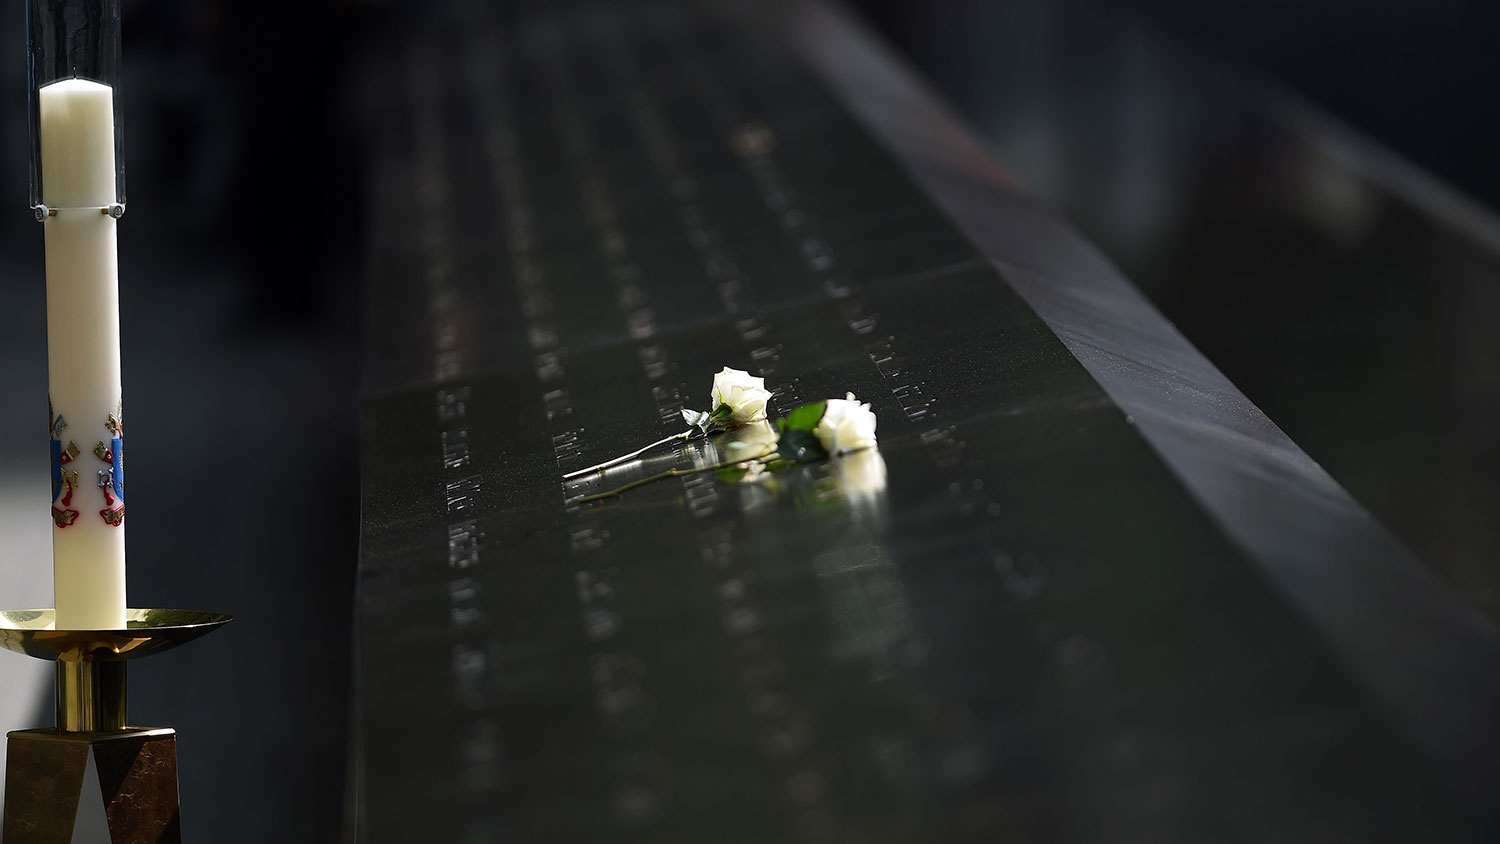 A white rose placed by Pope Francis is seen at the 9/11 memorial in New York on Sept. 25, 2015.
